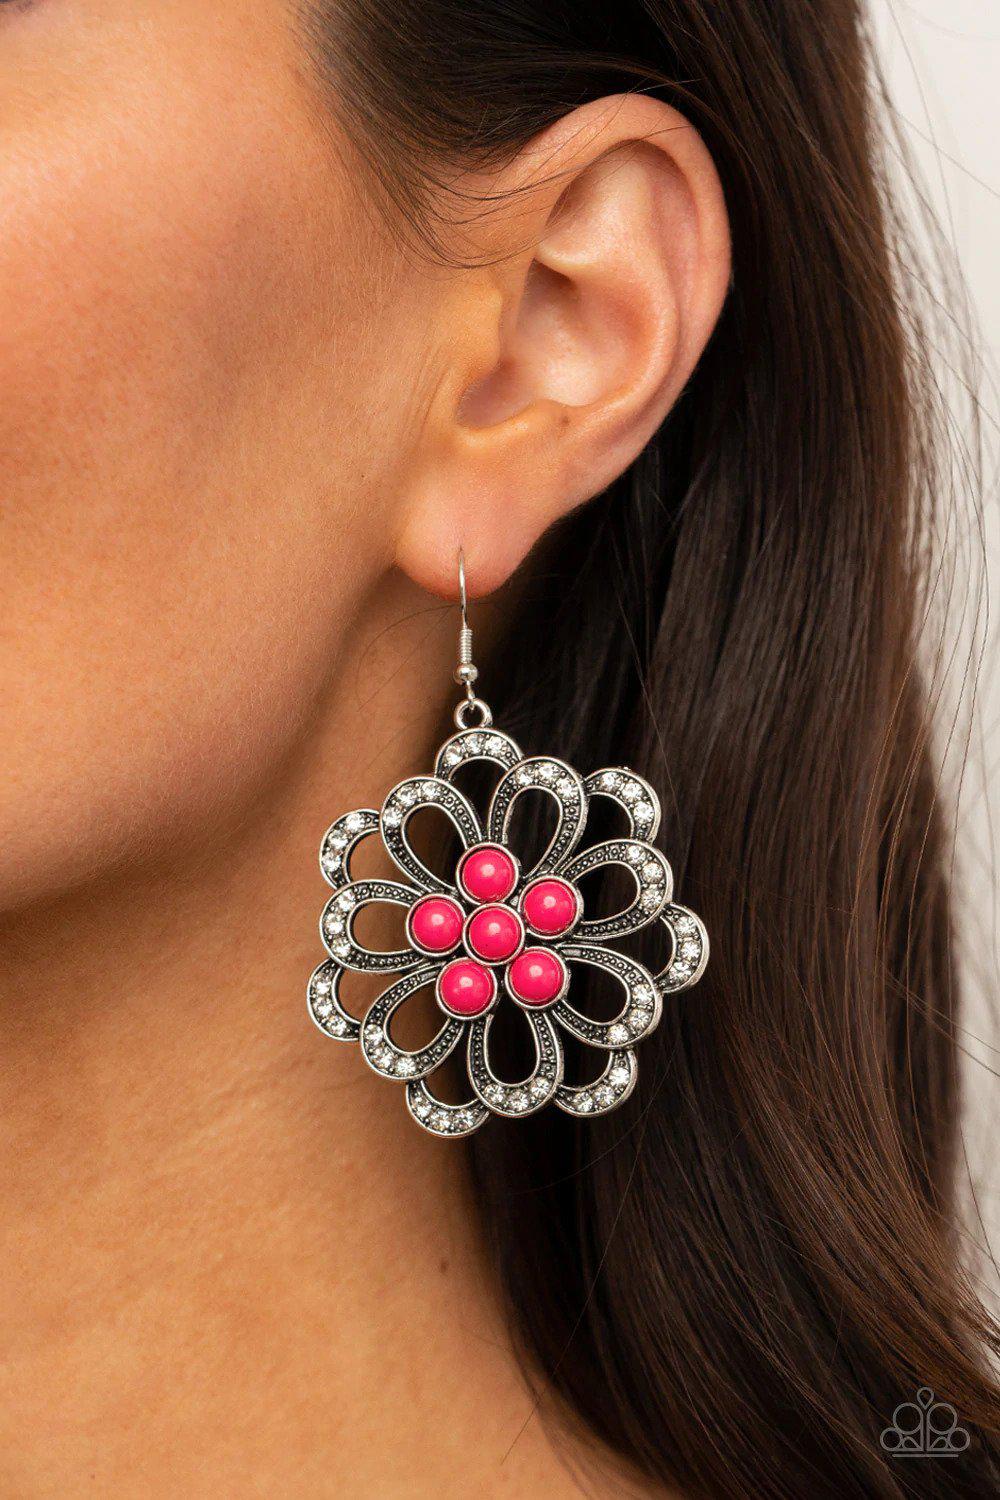 Dazzling Dewdrops Pink Earrings - Paparazzi Accessories- on model - CarasShop.com - $5 Jewelry by Cara Jewels